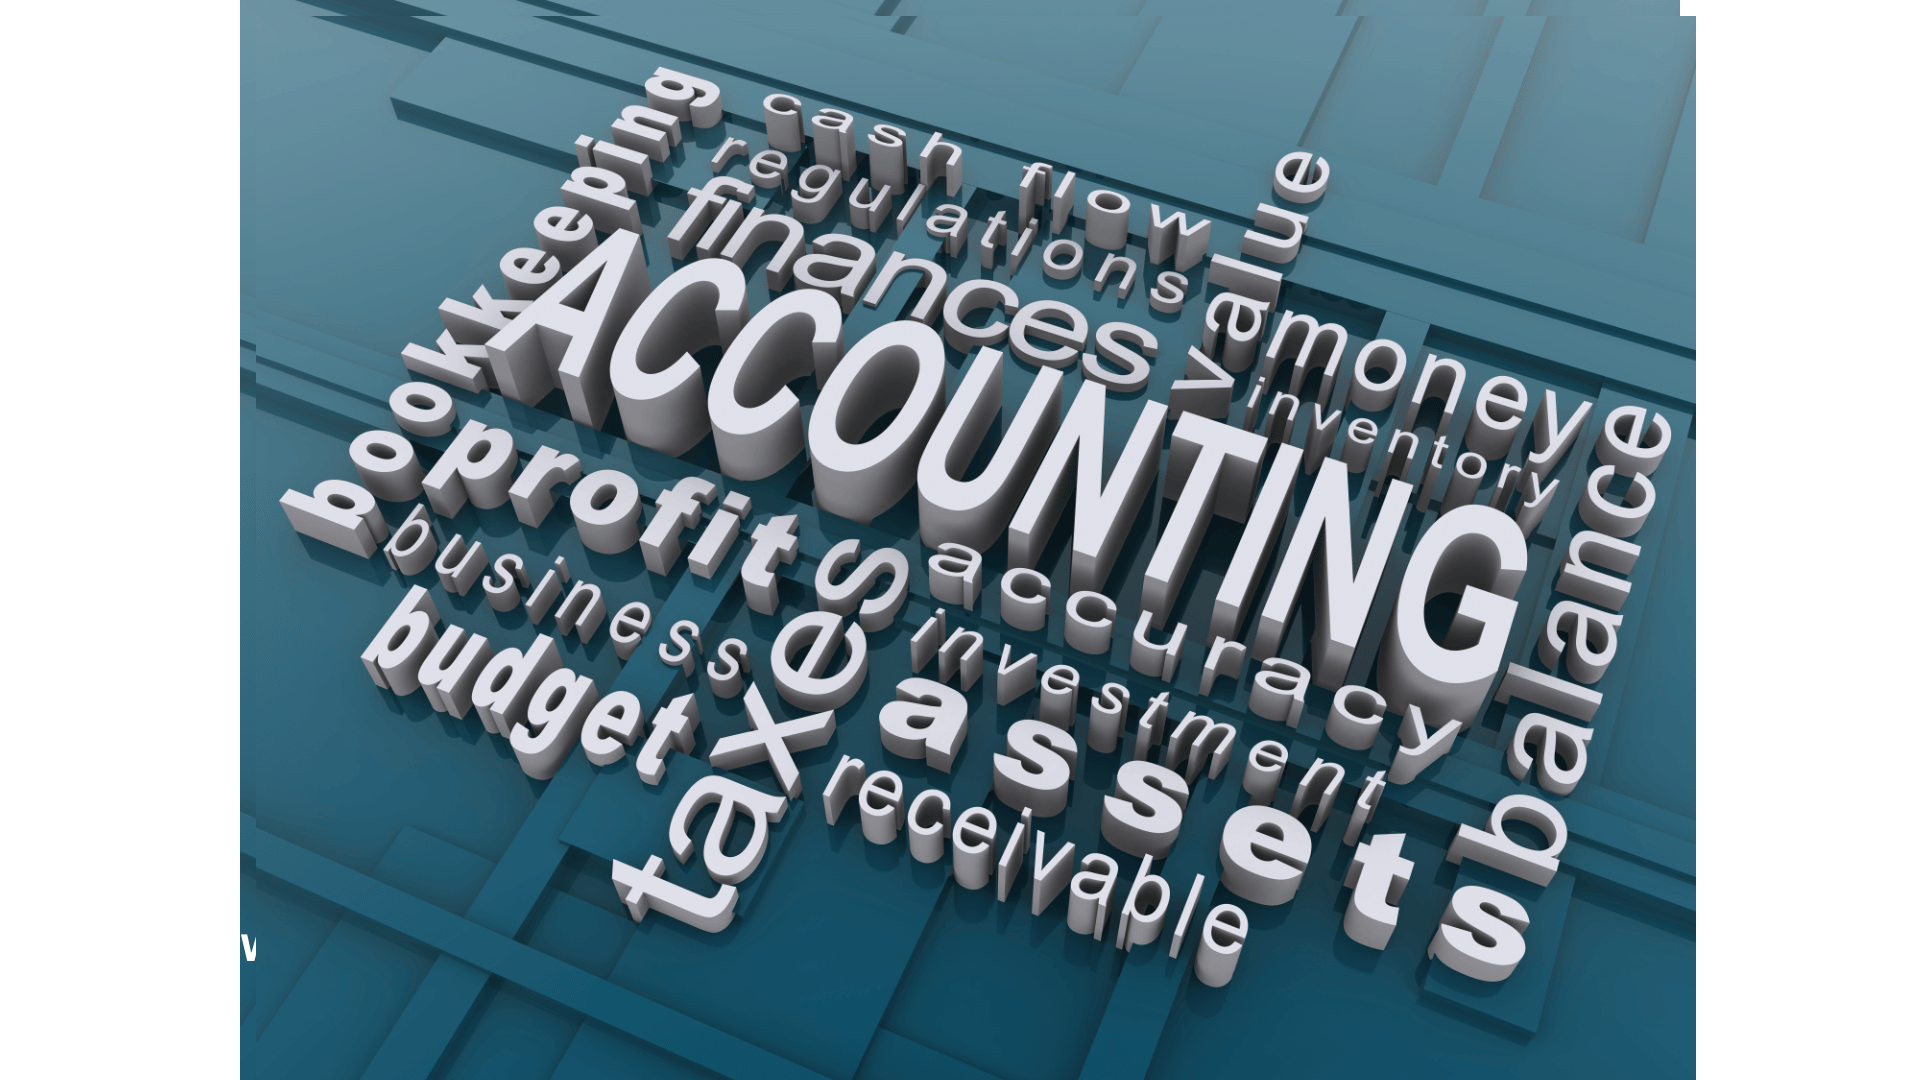 The word accounting is surrounded by other words on a blue background